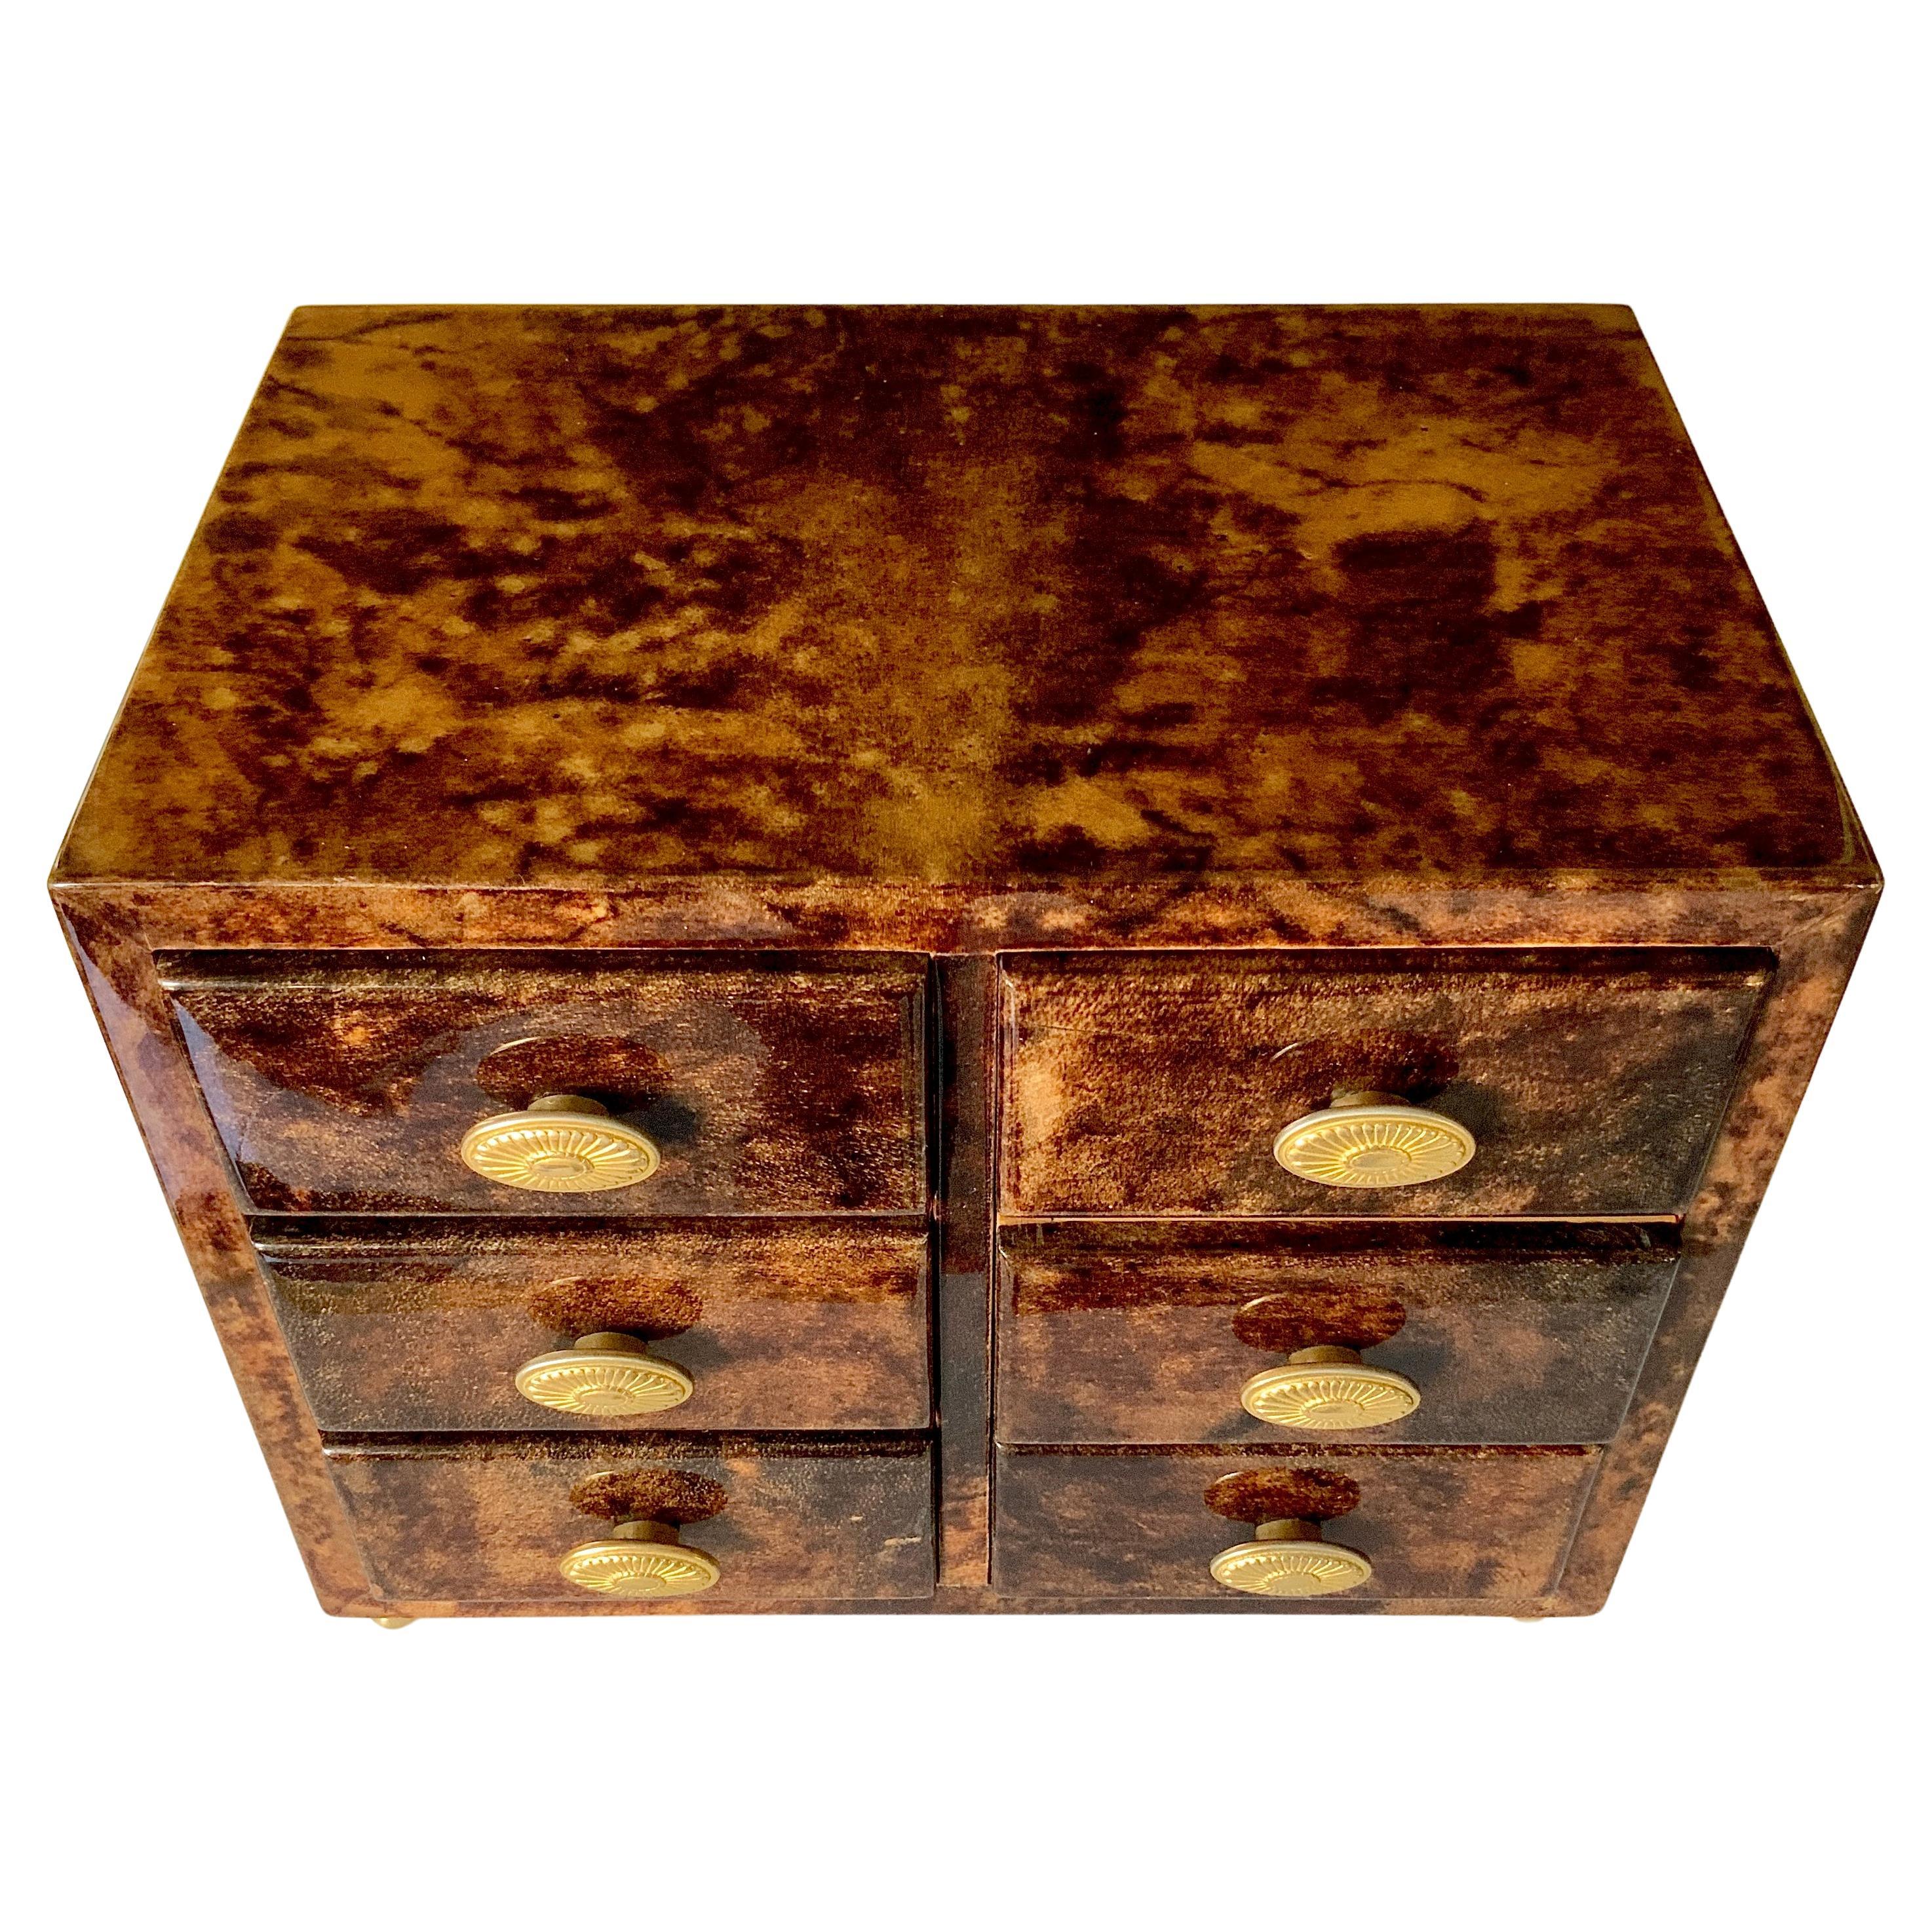 A fabulous vintage Aldo Tura Goatskin Jewelry Chest. The quality is impeccable. The beautiful goatskin with 6 drawers in fine wood and 5 have the original green velvet to lay your jewelry on. The knobs on the drawers are gold plated brass. 4 brass